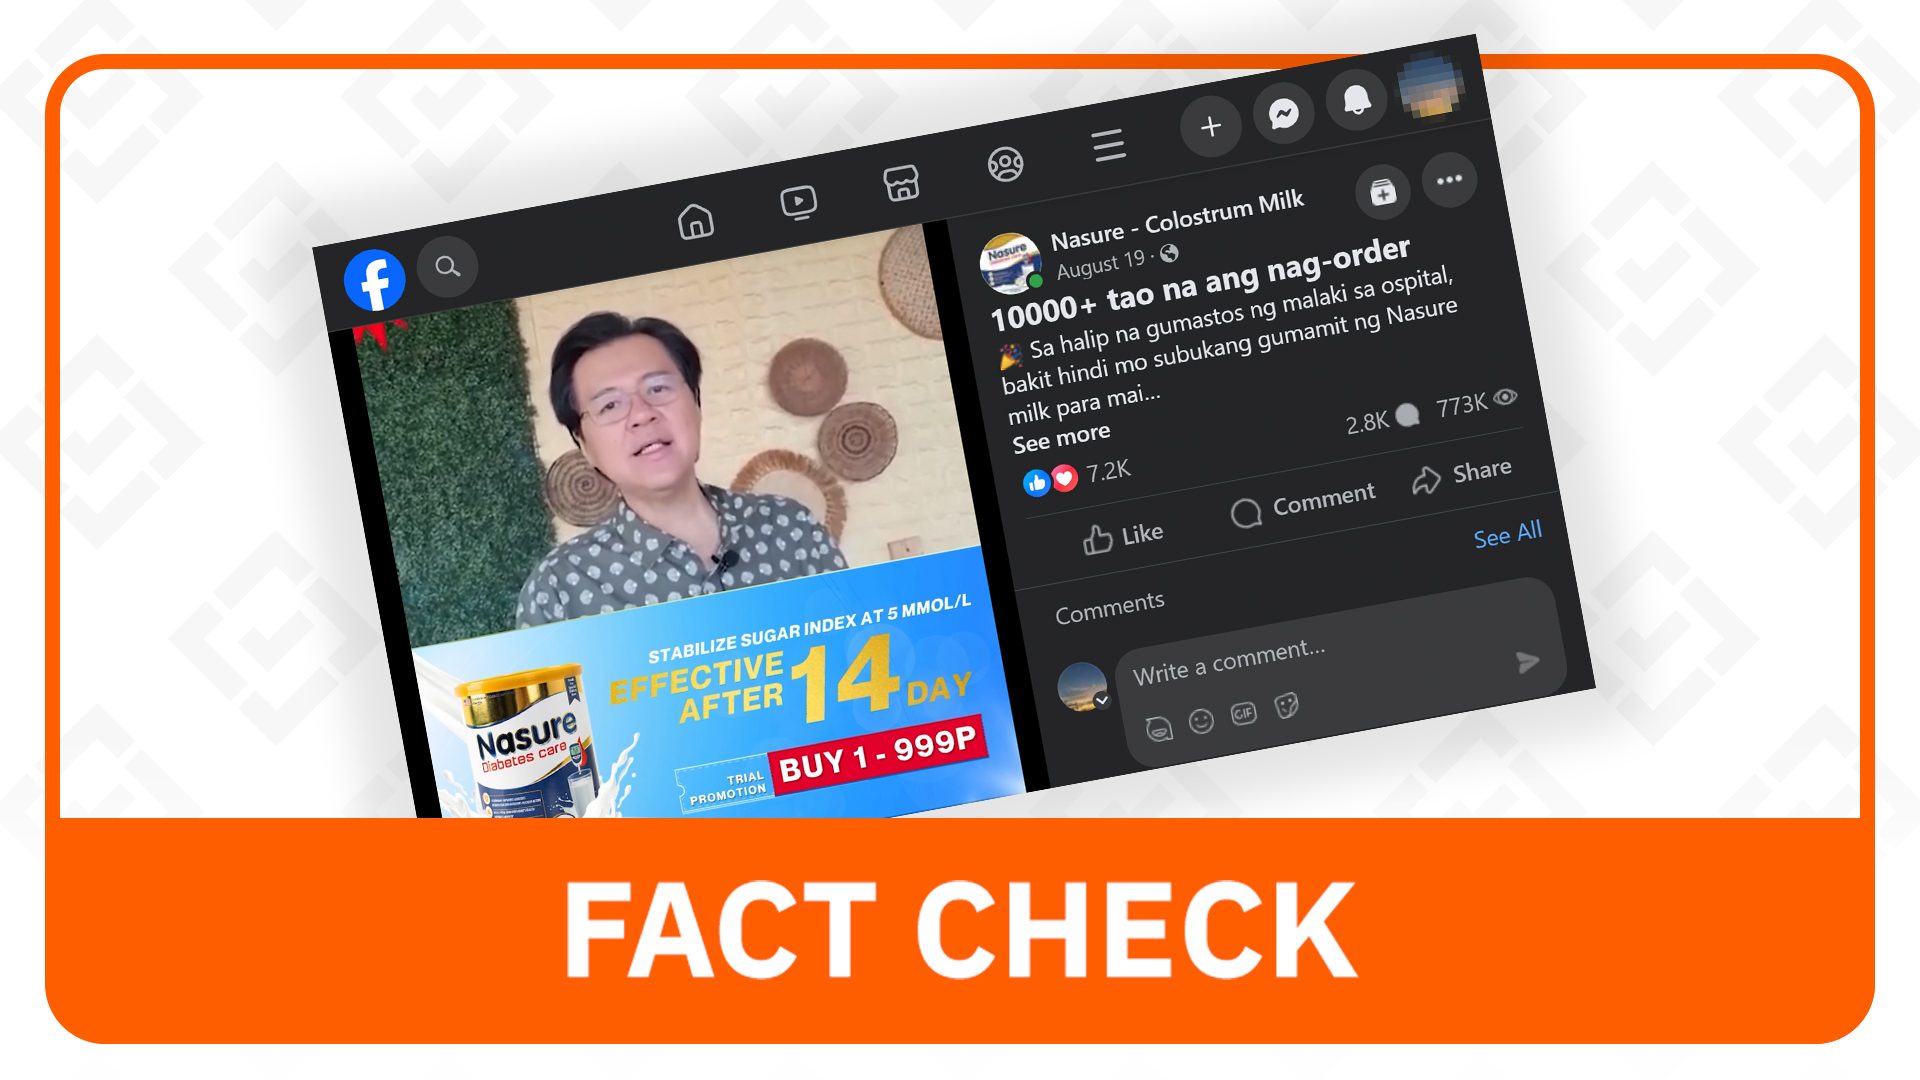 FACT CHECK: Doc Willie Ong doesn’t endorse Nasure Colostrum Milk